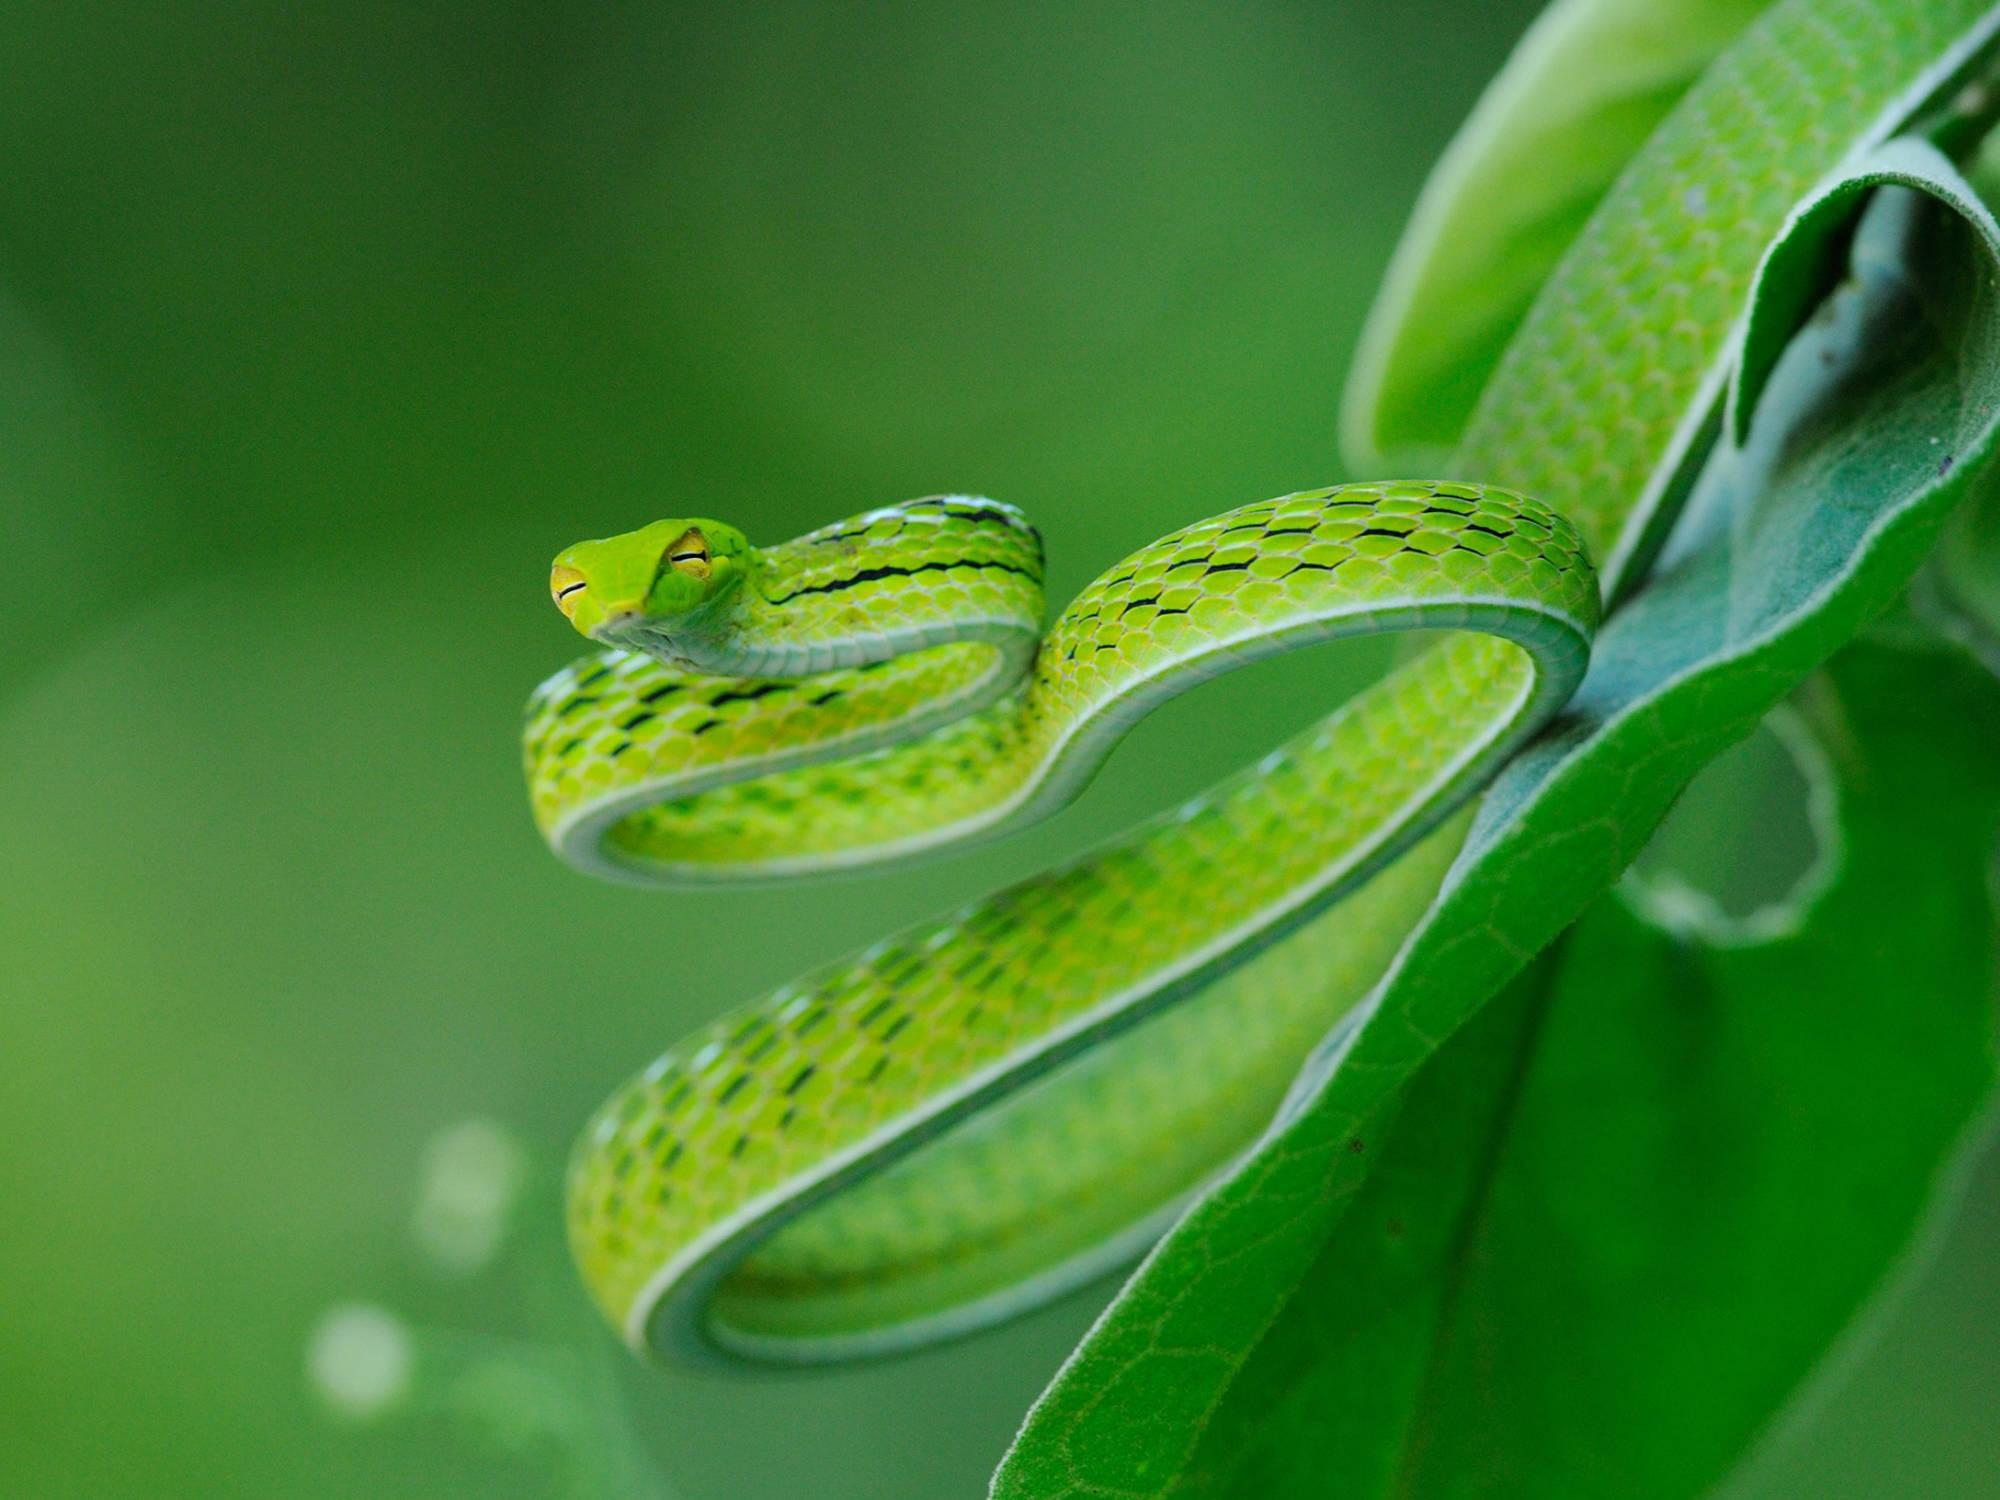 Smooth green snake live wallpaper